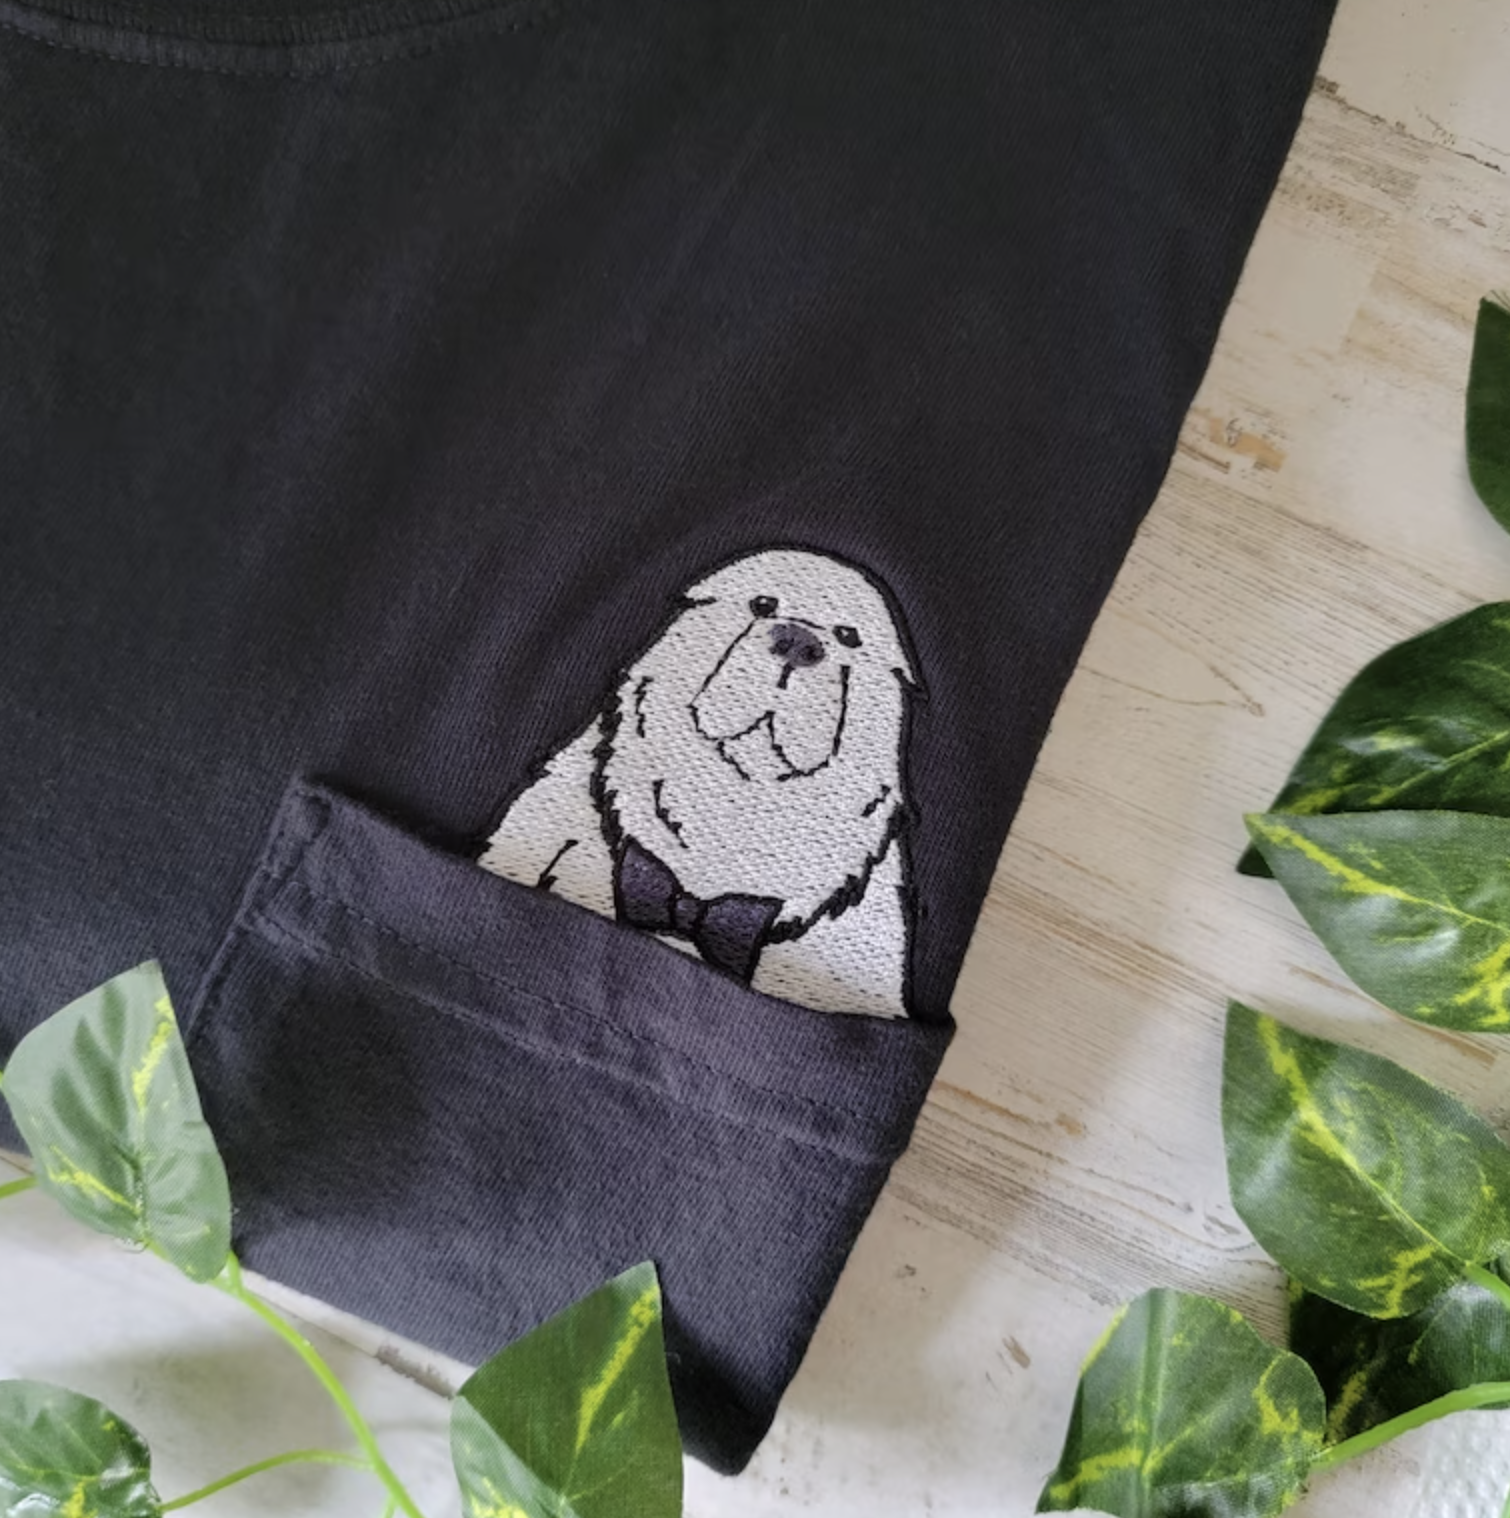 Black T-shirt with a graphic of a smiling dog, folded on a wooden surface with green leaves around